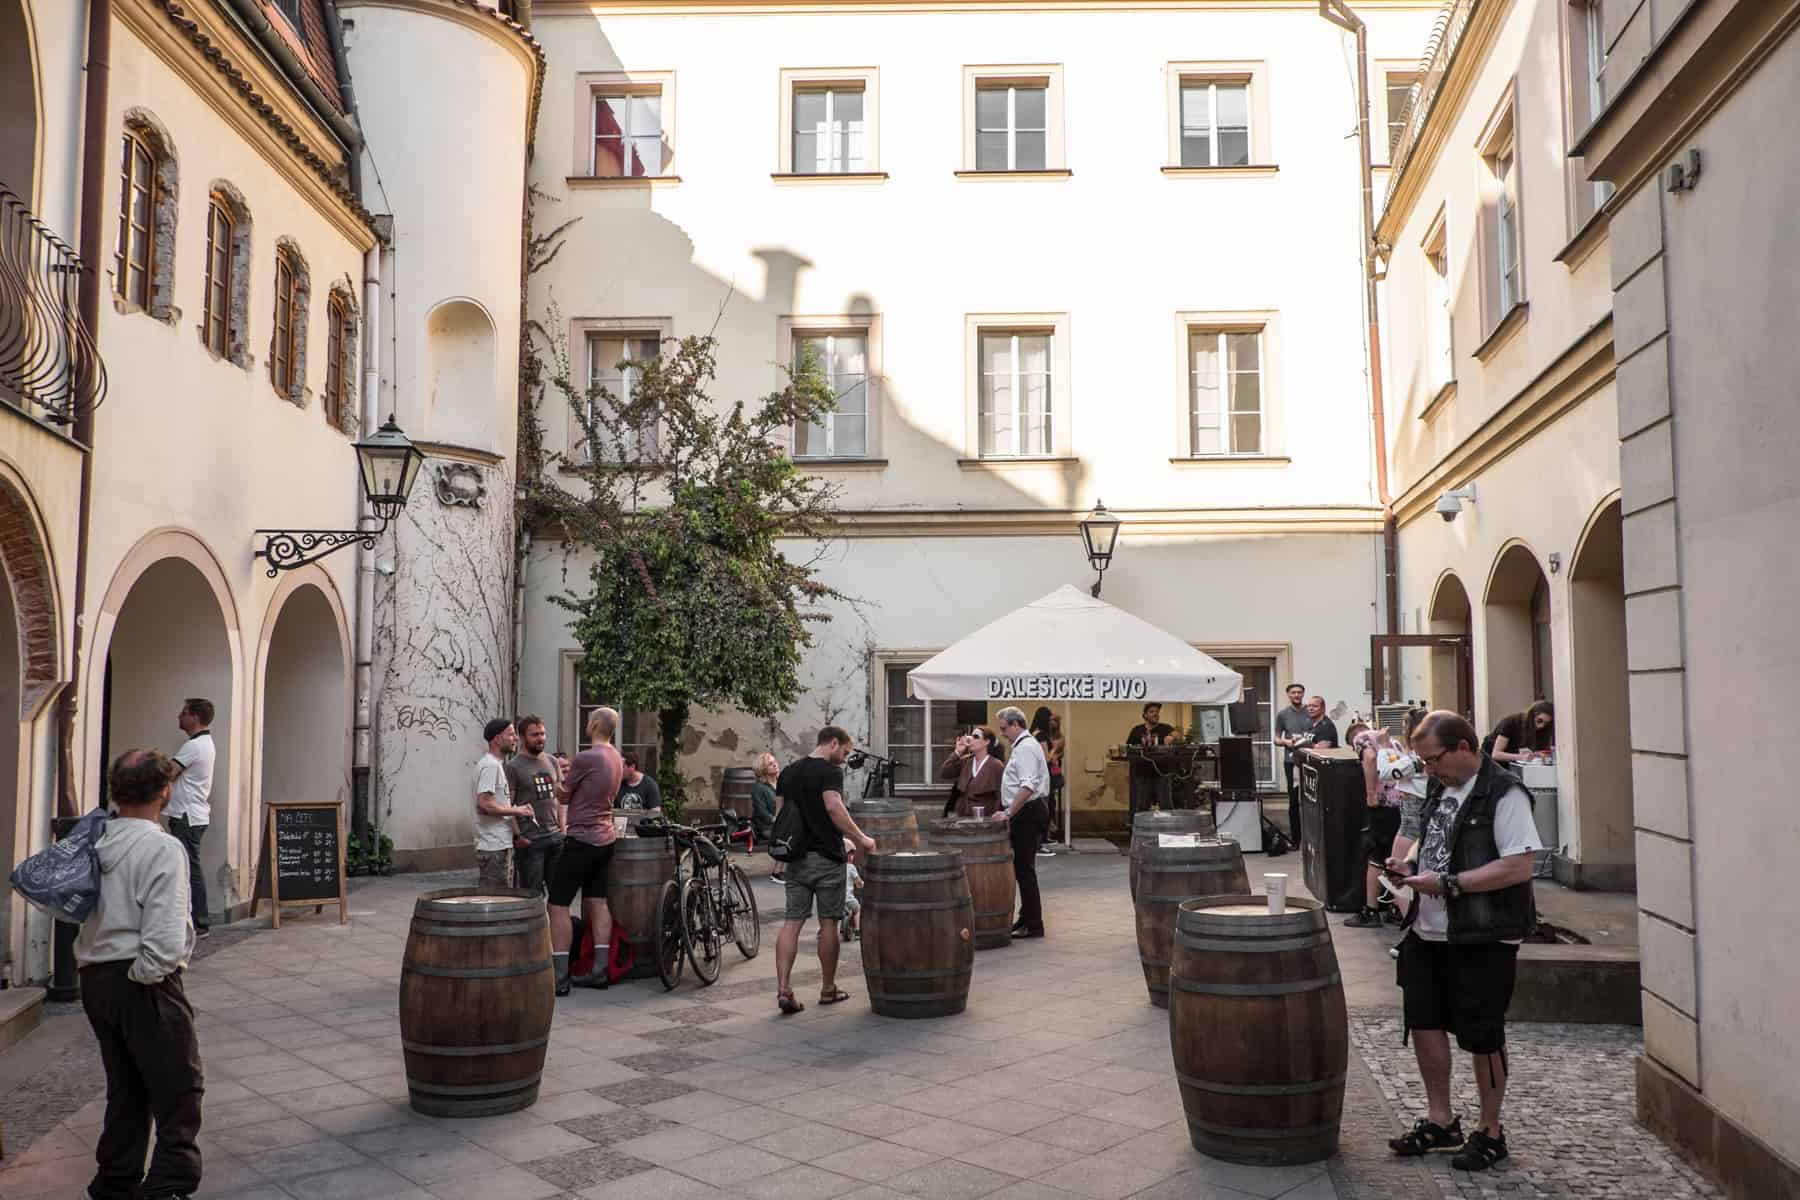 People standing around wooden barrels, drinking at a social gathering in a courtyard in Brno, Czech Republic.